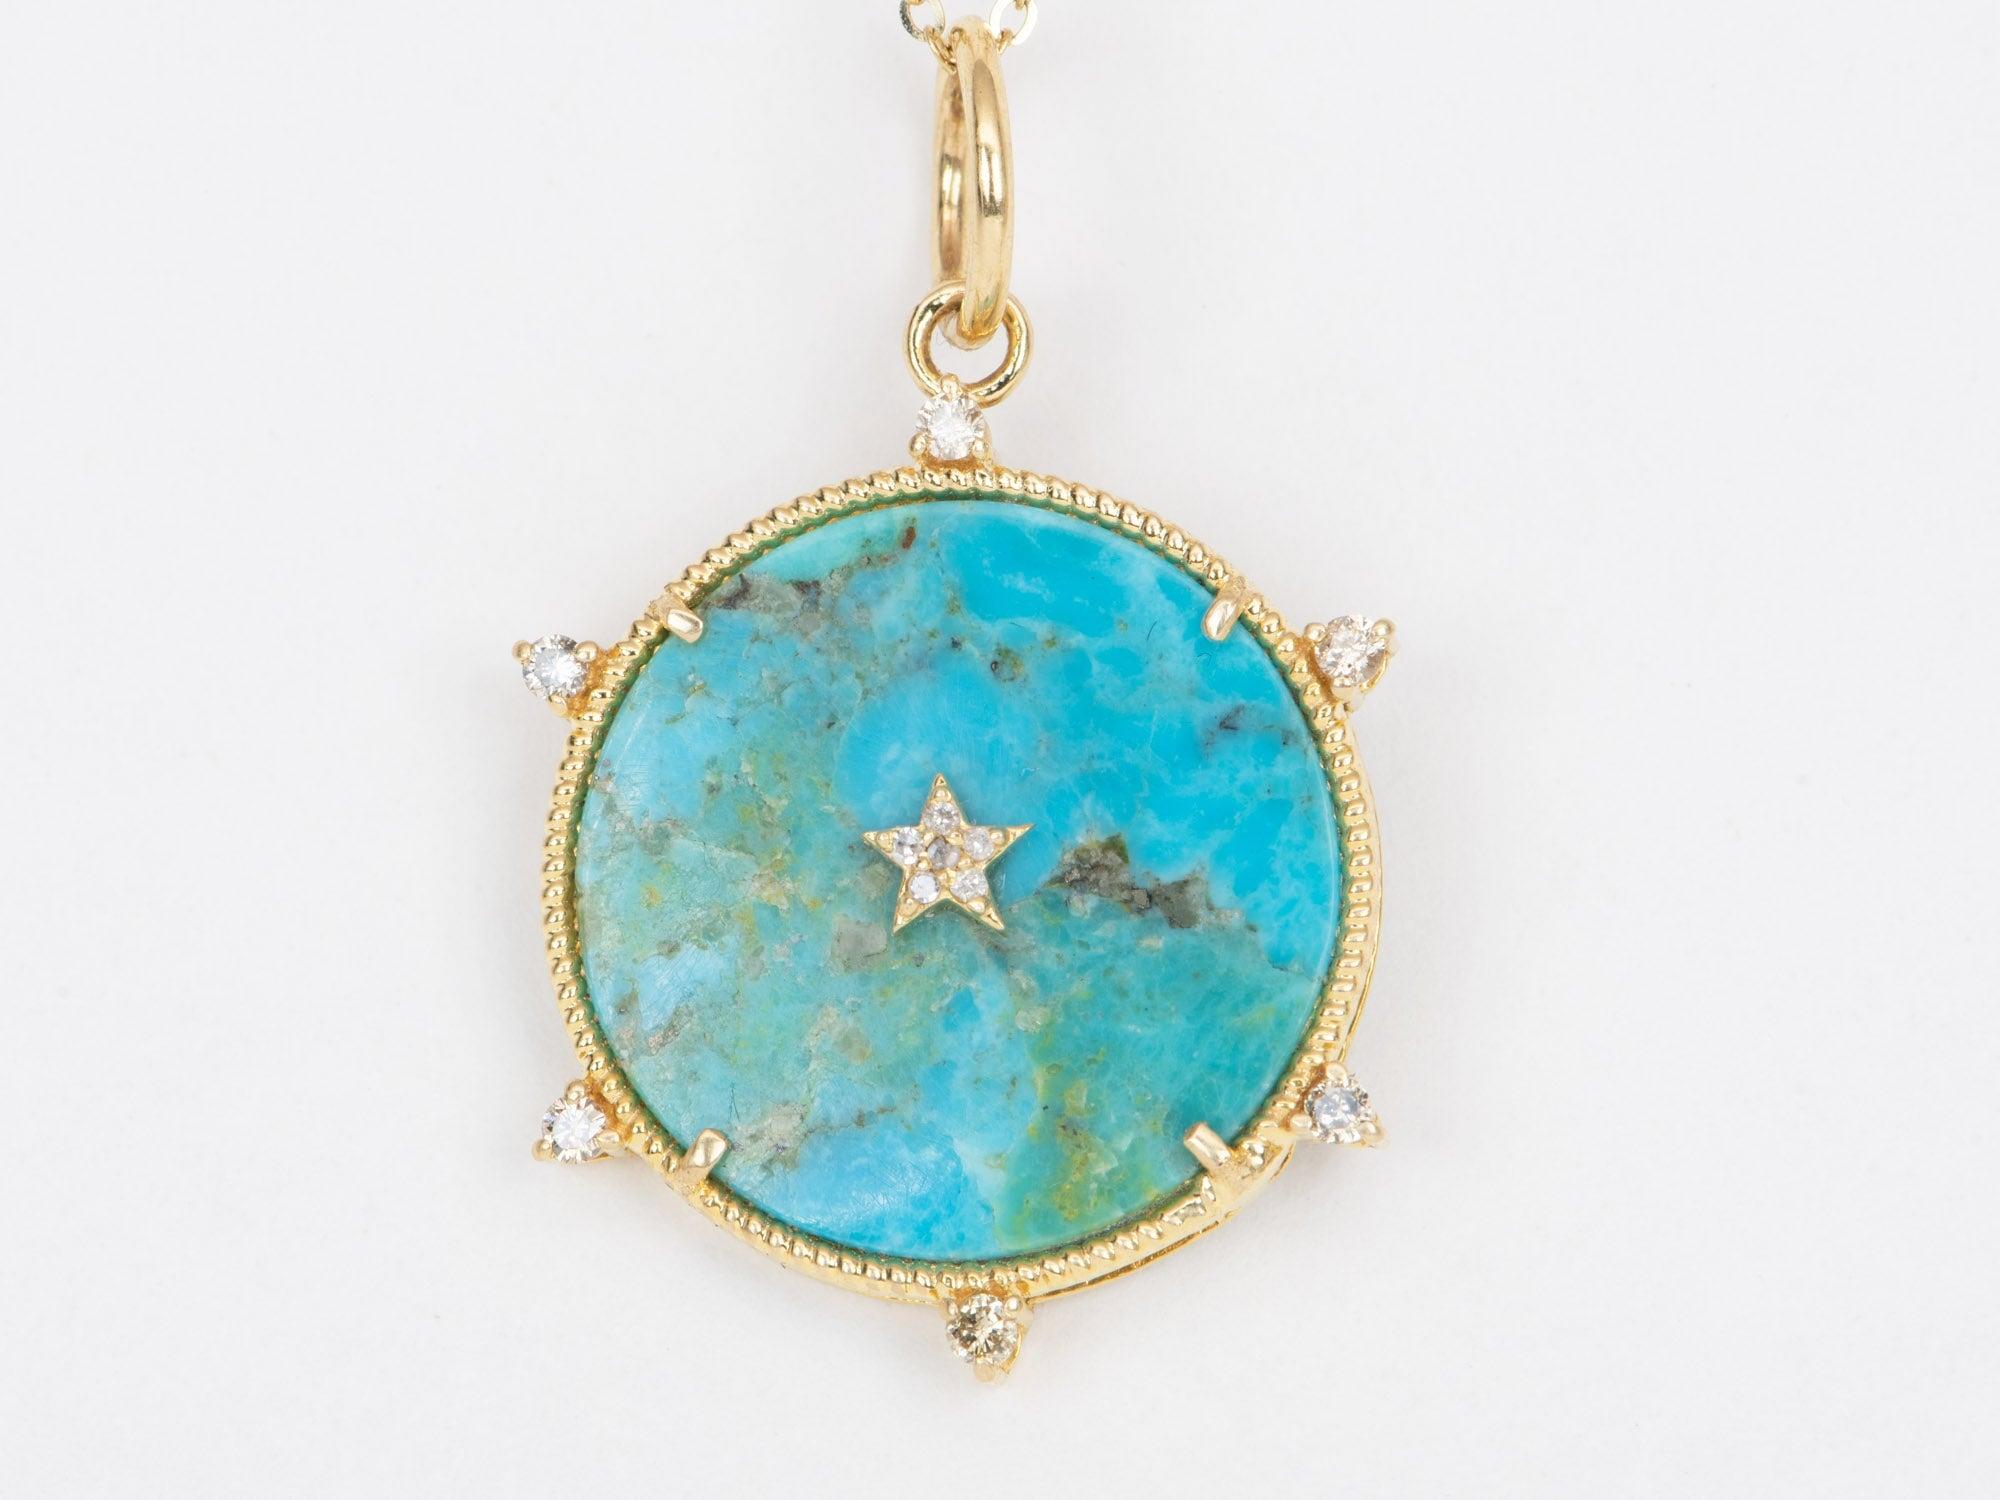 ♥ A beautiful diamond and stars pendant with a natural turquoise backing 
♥ The pendant measures 28.8 mm in length, 22.4 mm in width, and is 4.7 mm thick

♥ Gemstone: Turquoise, Diamond 0.17ct
♥ All stone(s) used are genuine, earth-mined, and